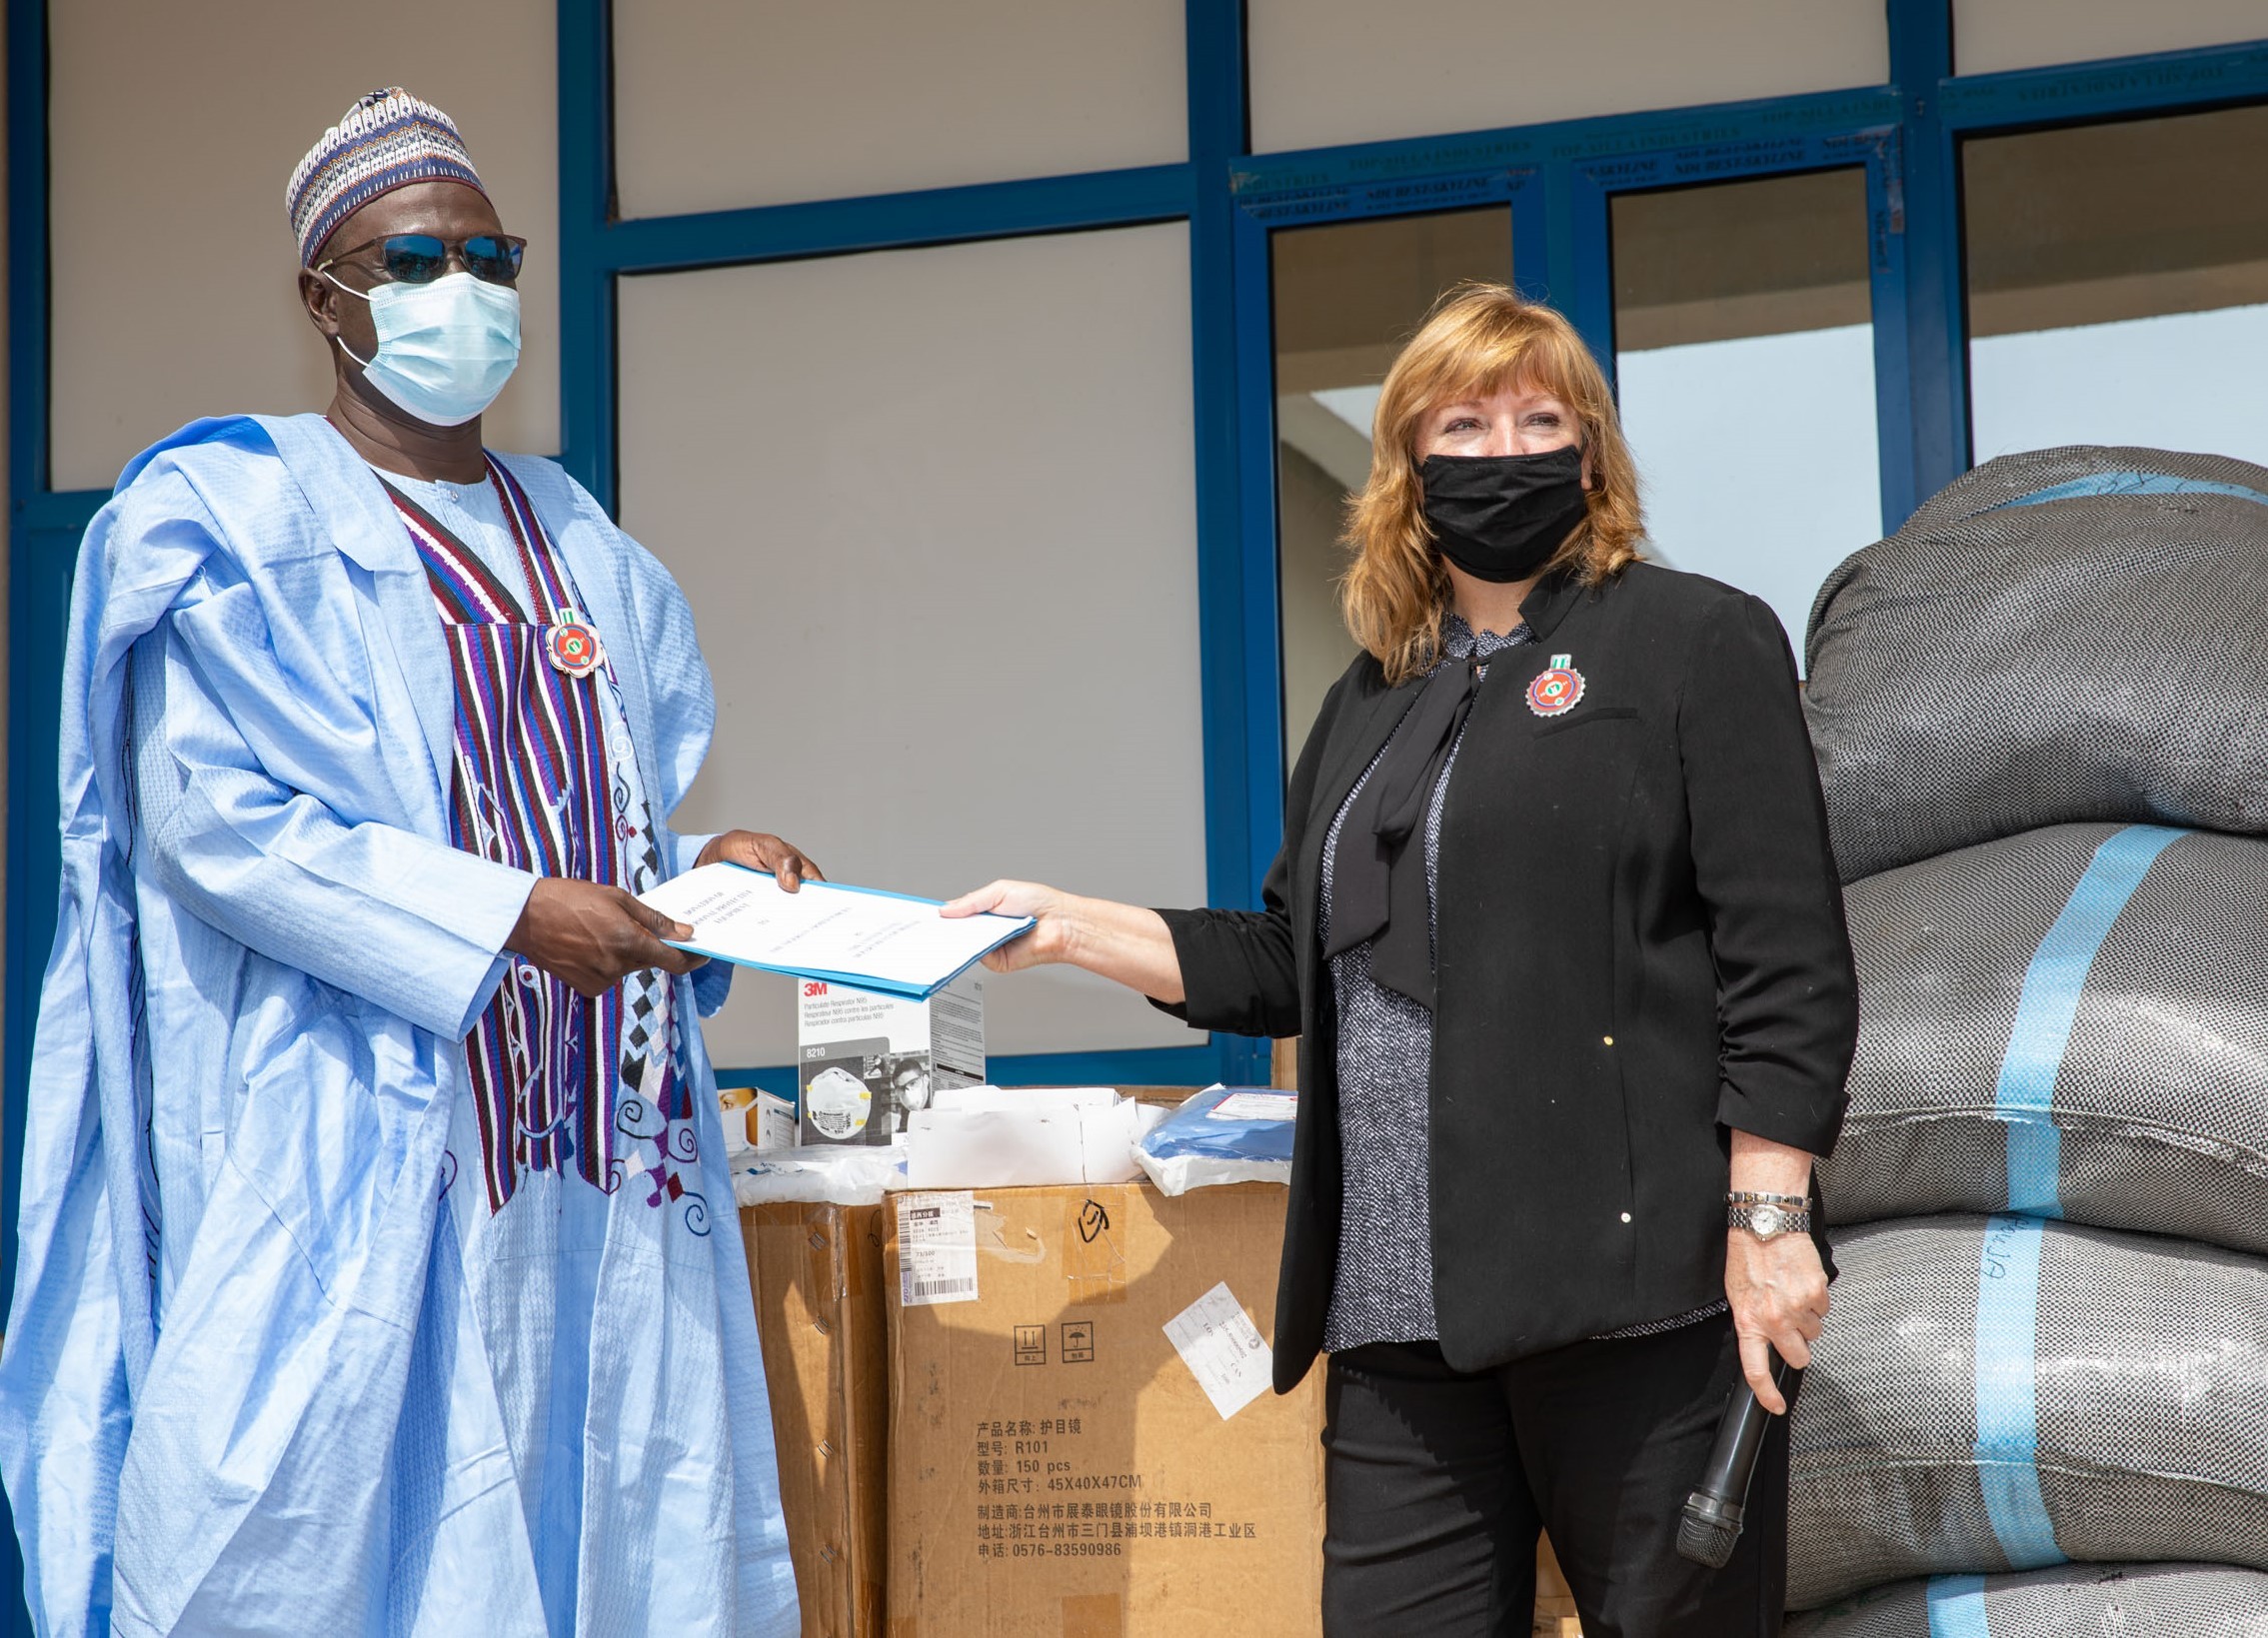 Handover of AFRICOM-Supported COVID-19 Personal Protective Equipment